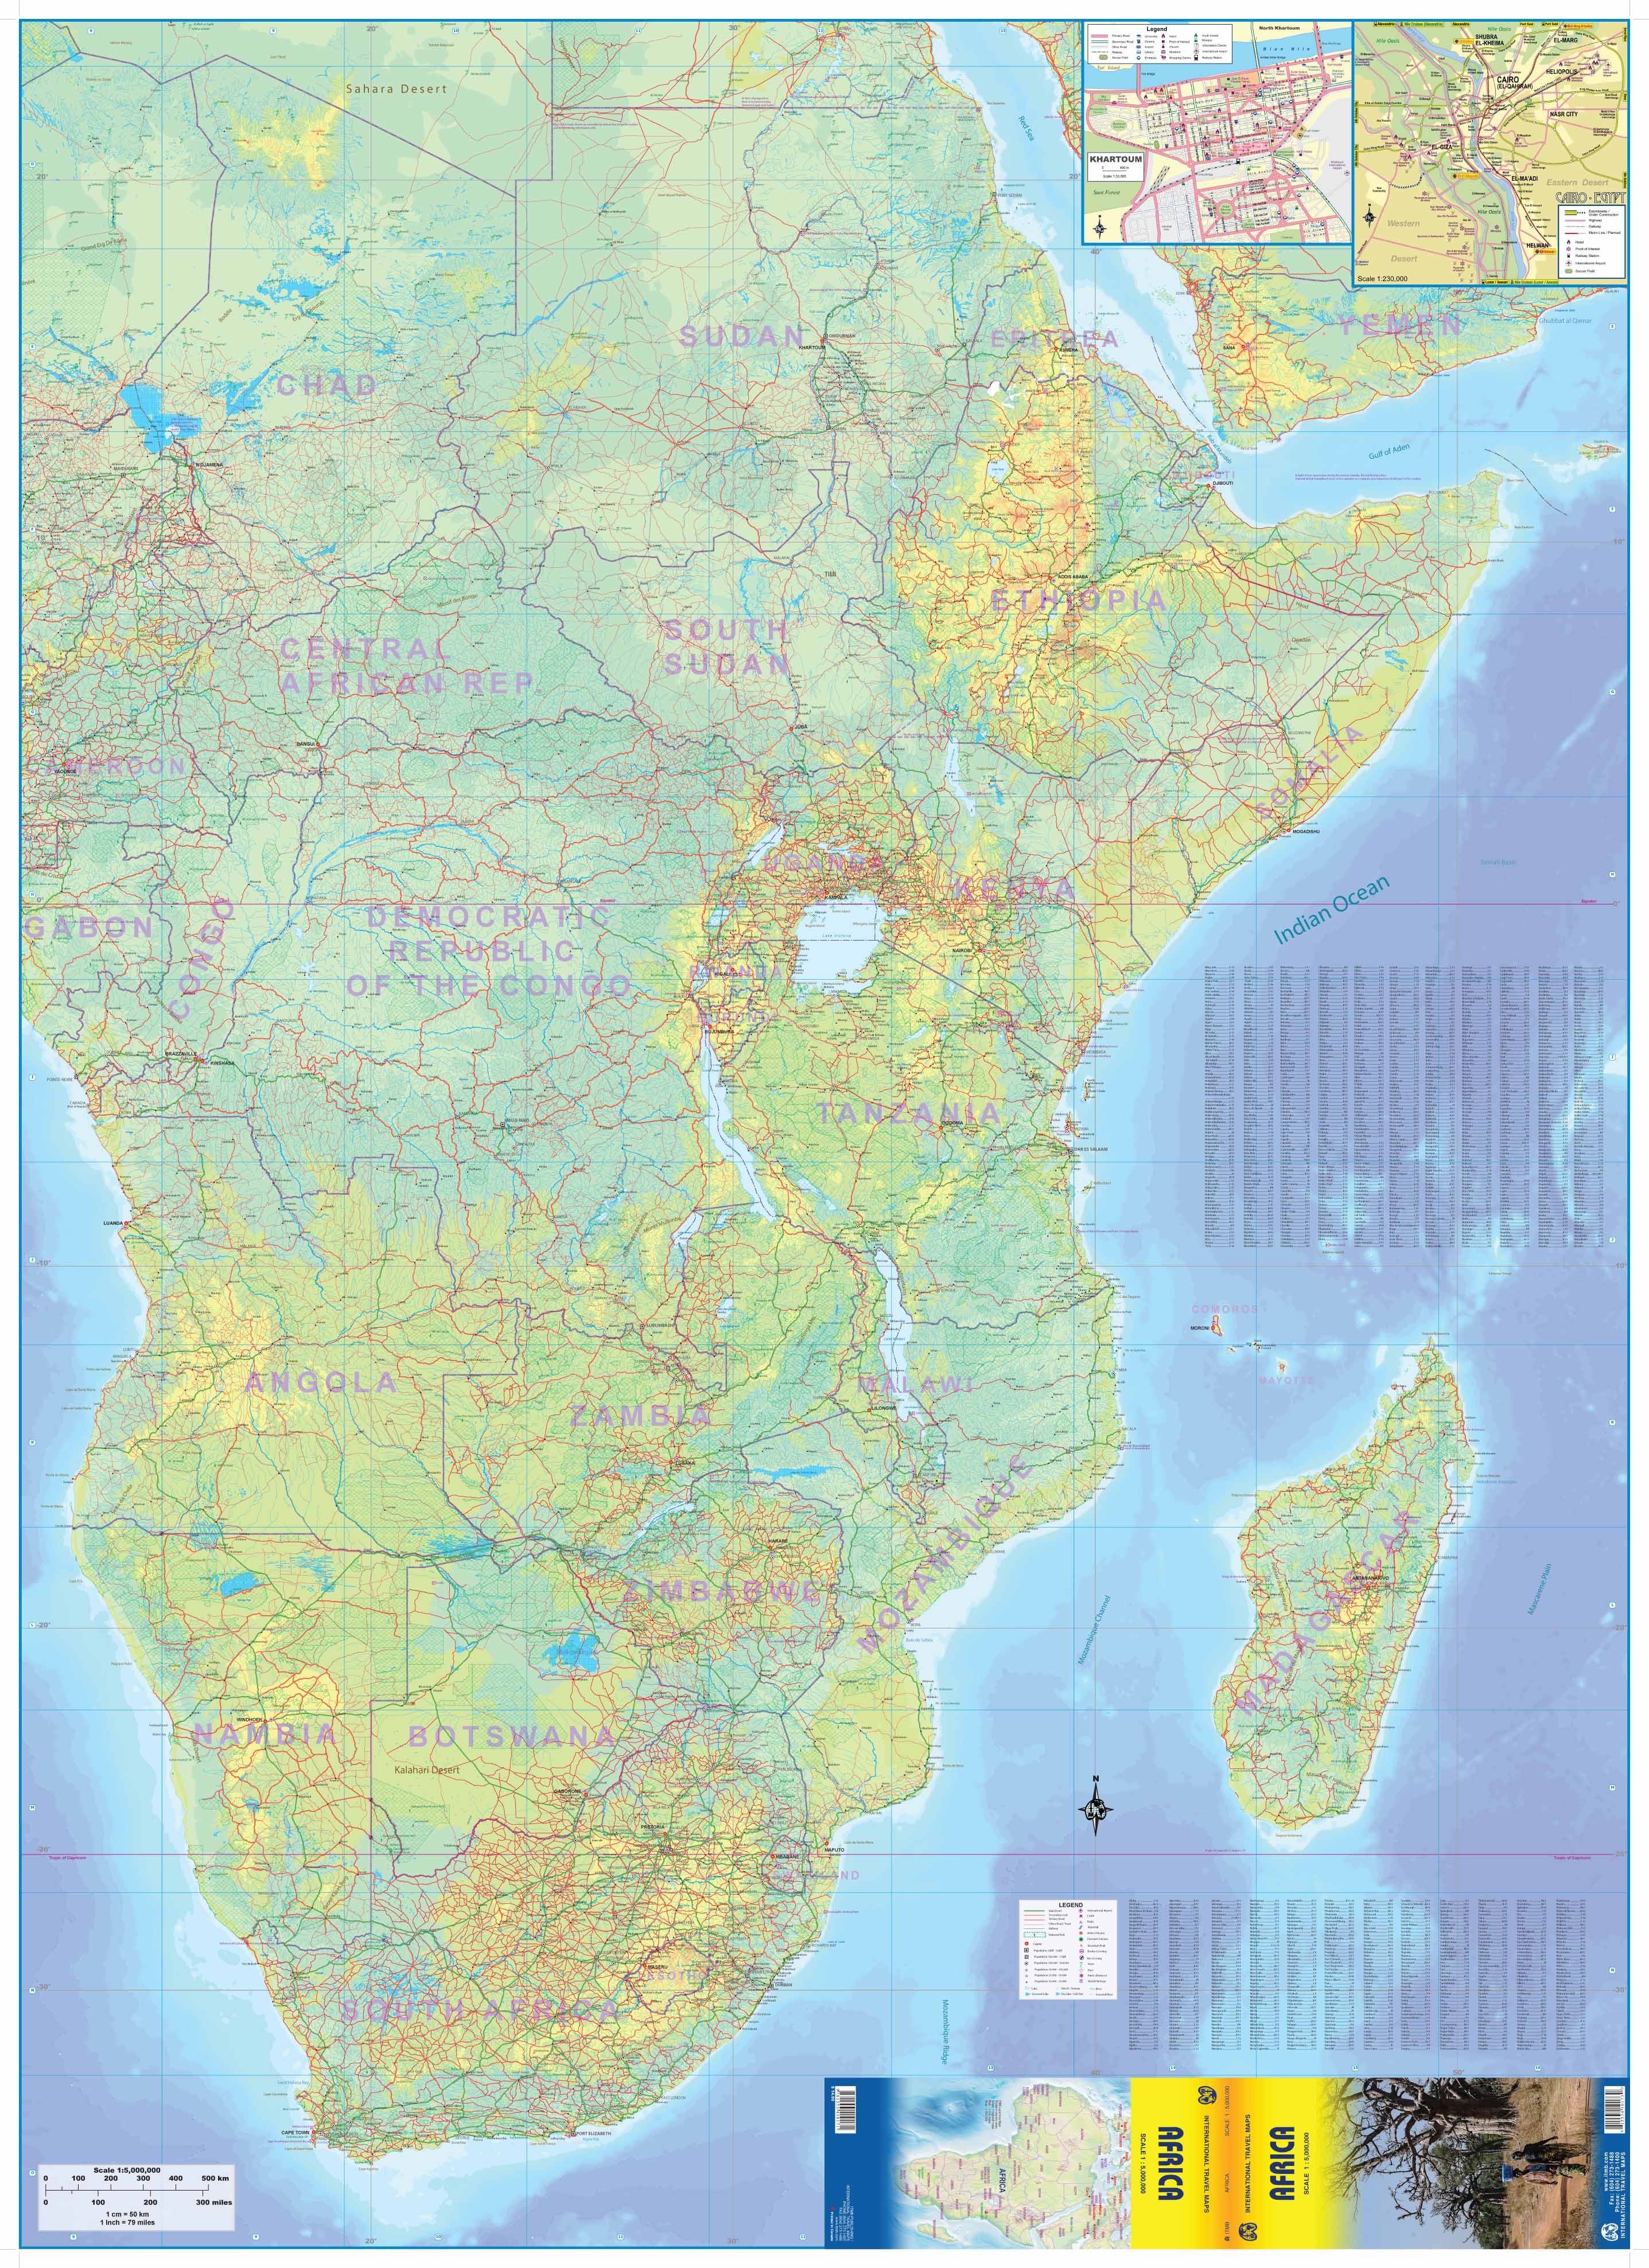 What companies sell large maps of Ghana, Africa?